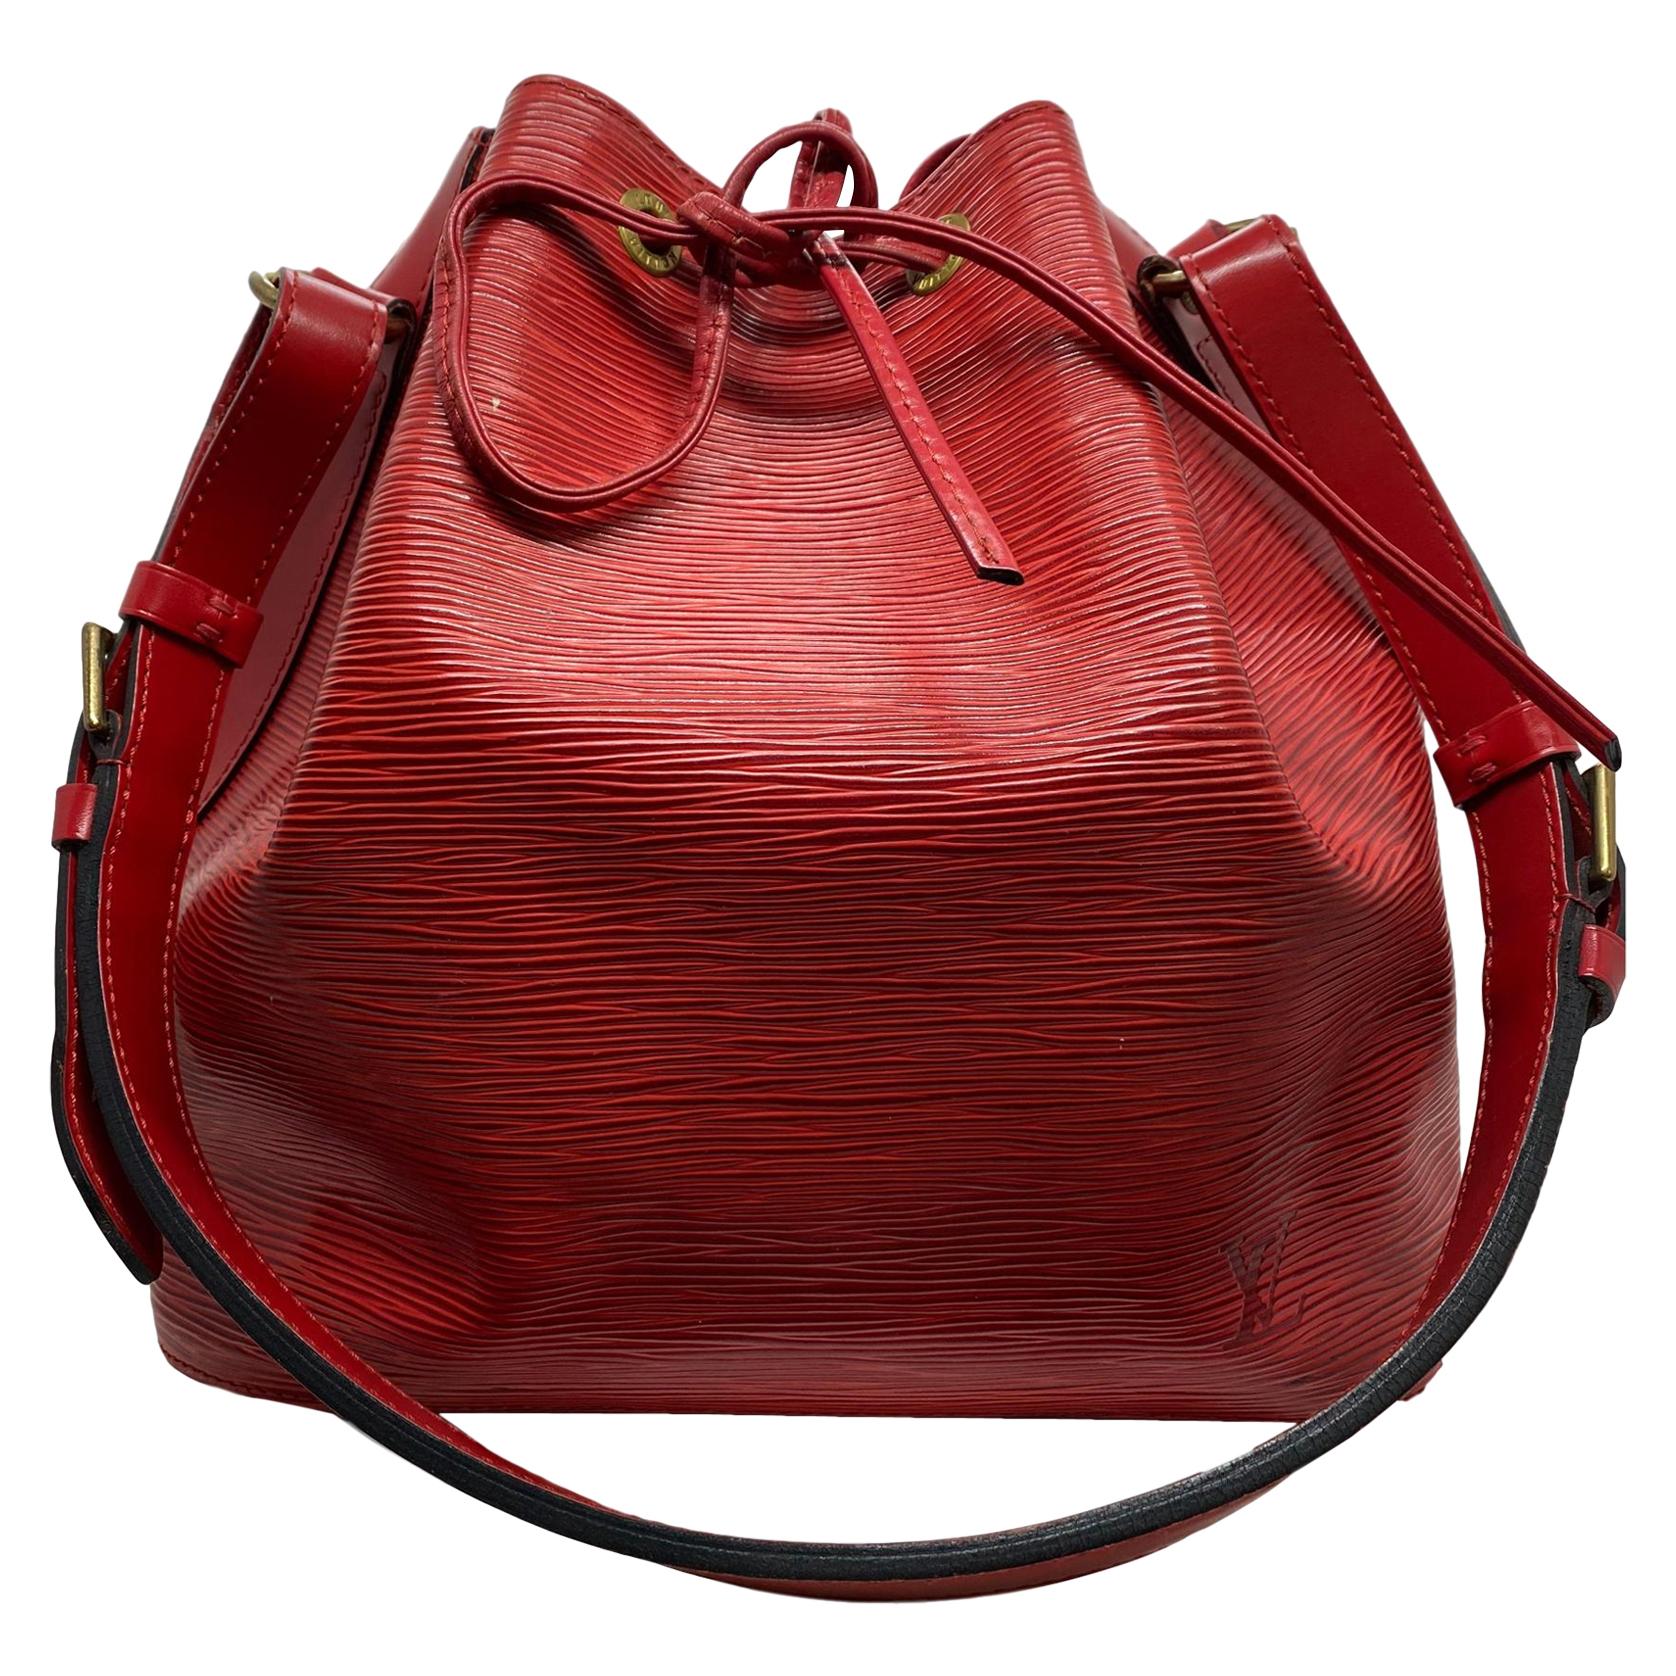 Louis Vuitton Noe PM Bucket Bag in Red EPI Leather, June 1995.